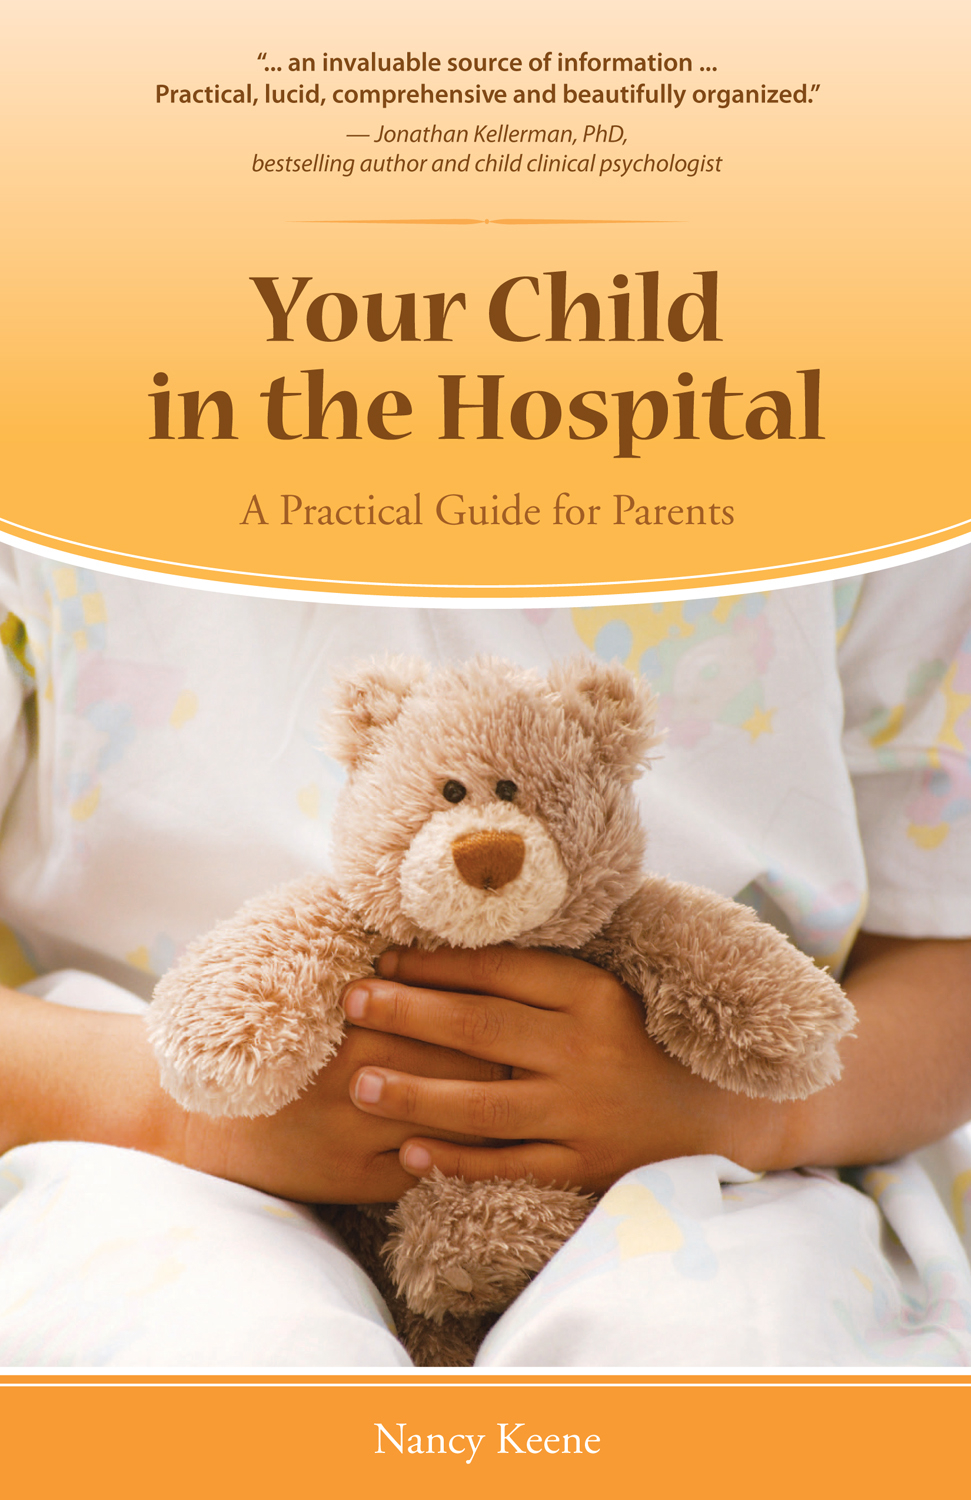 Your Child in the Hospital